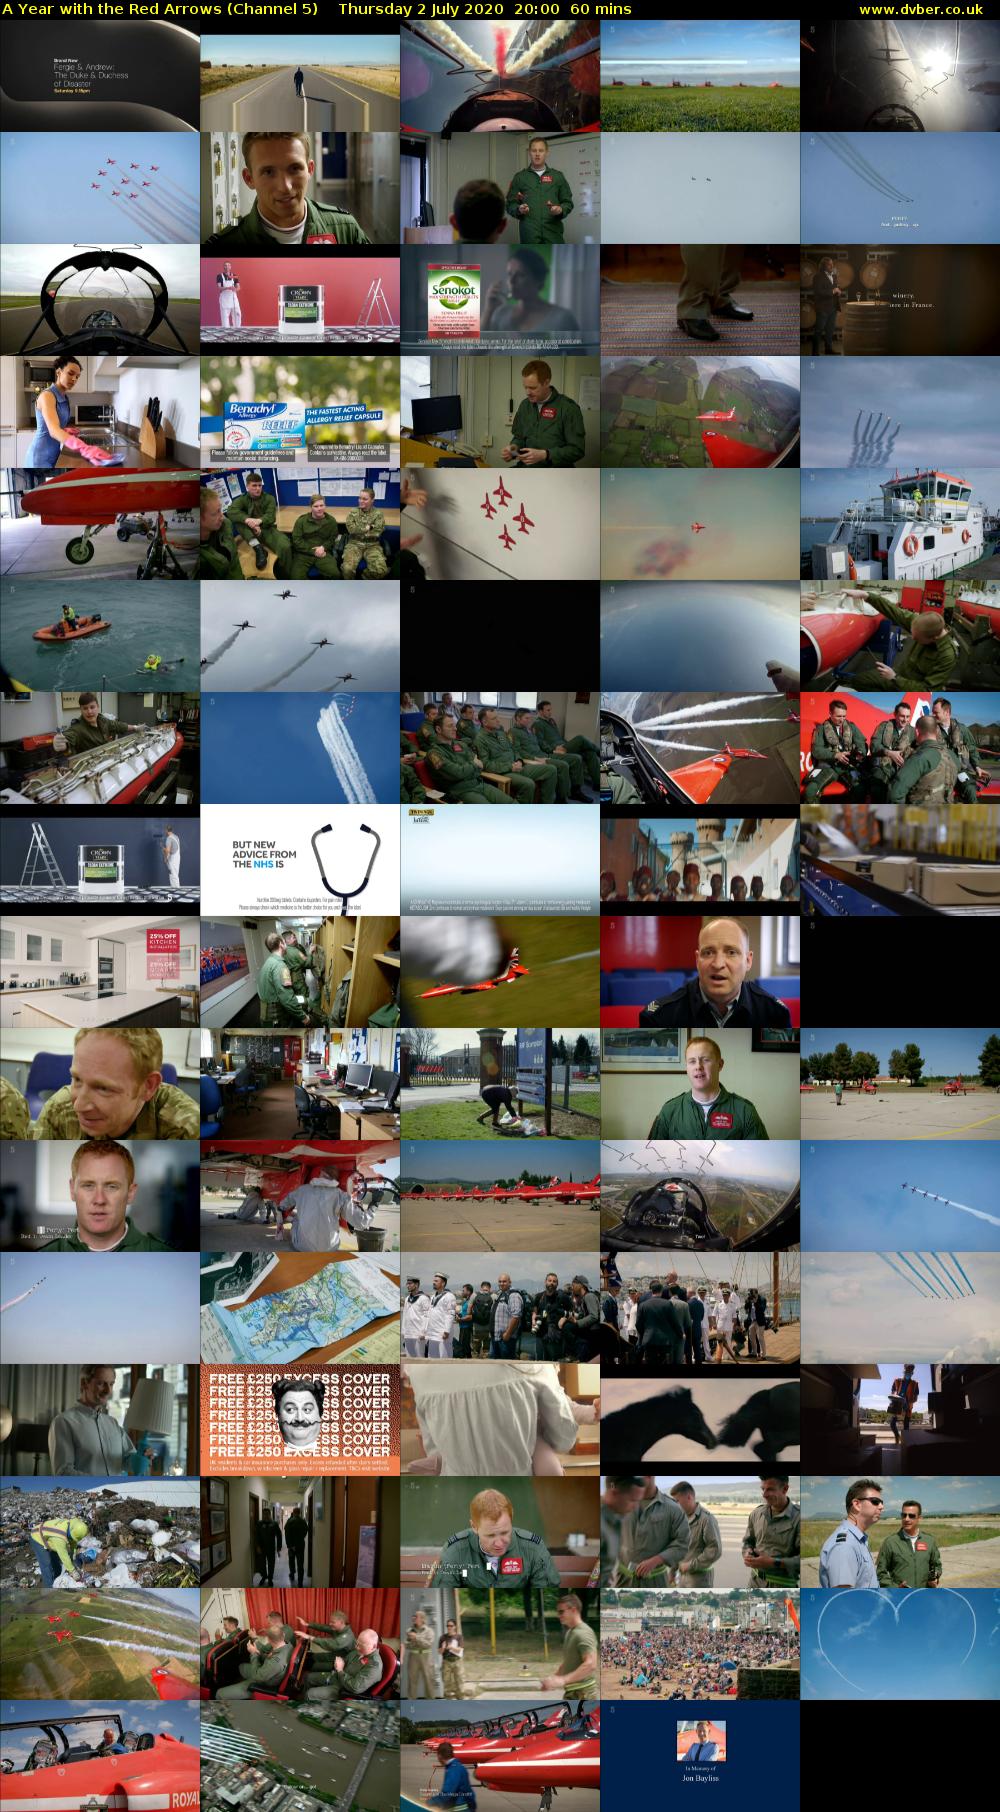 A Year with the Red Arrows (Channel 5) Thursday 2 July 2020 20:00 - 21:00